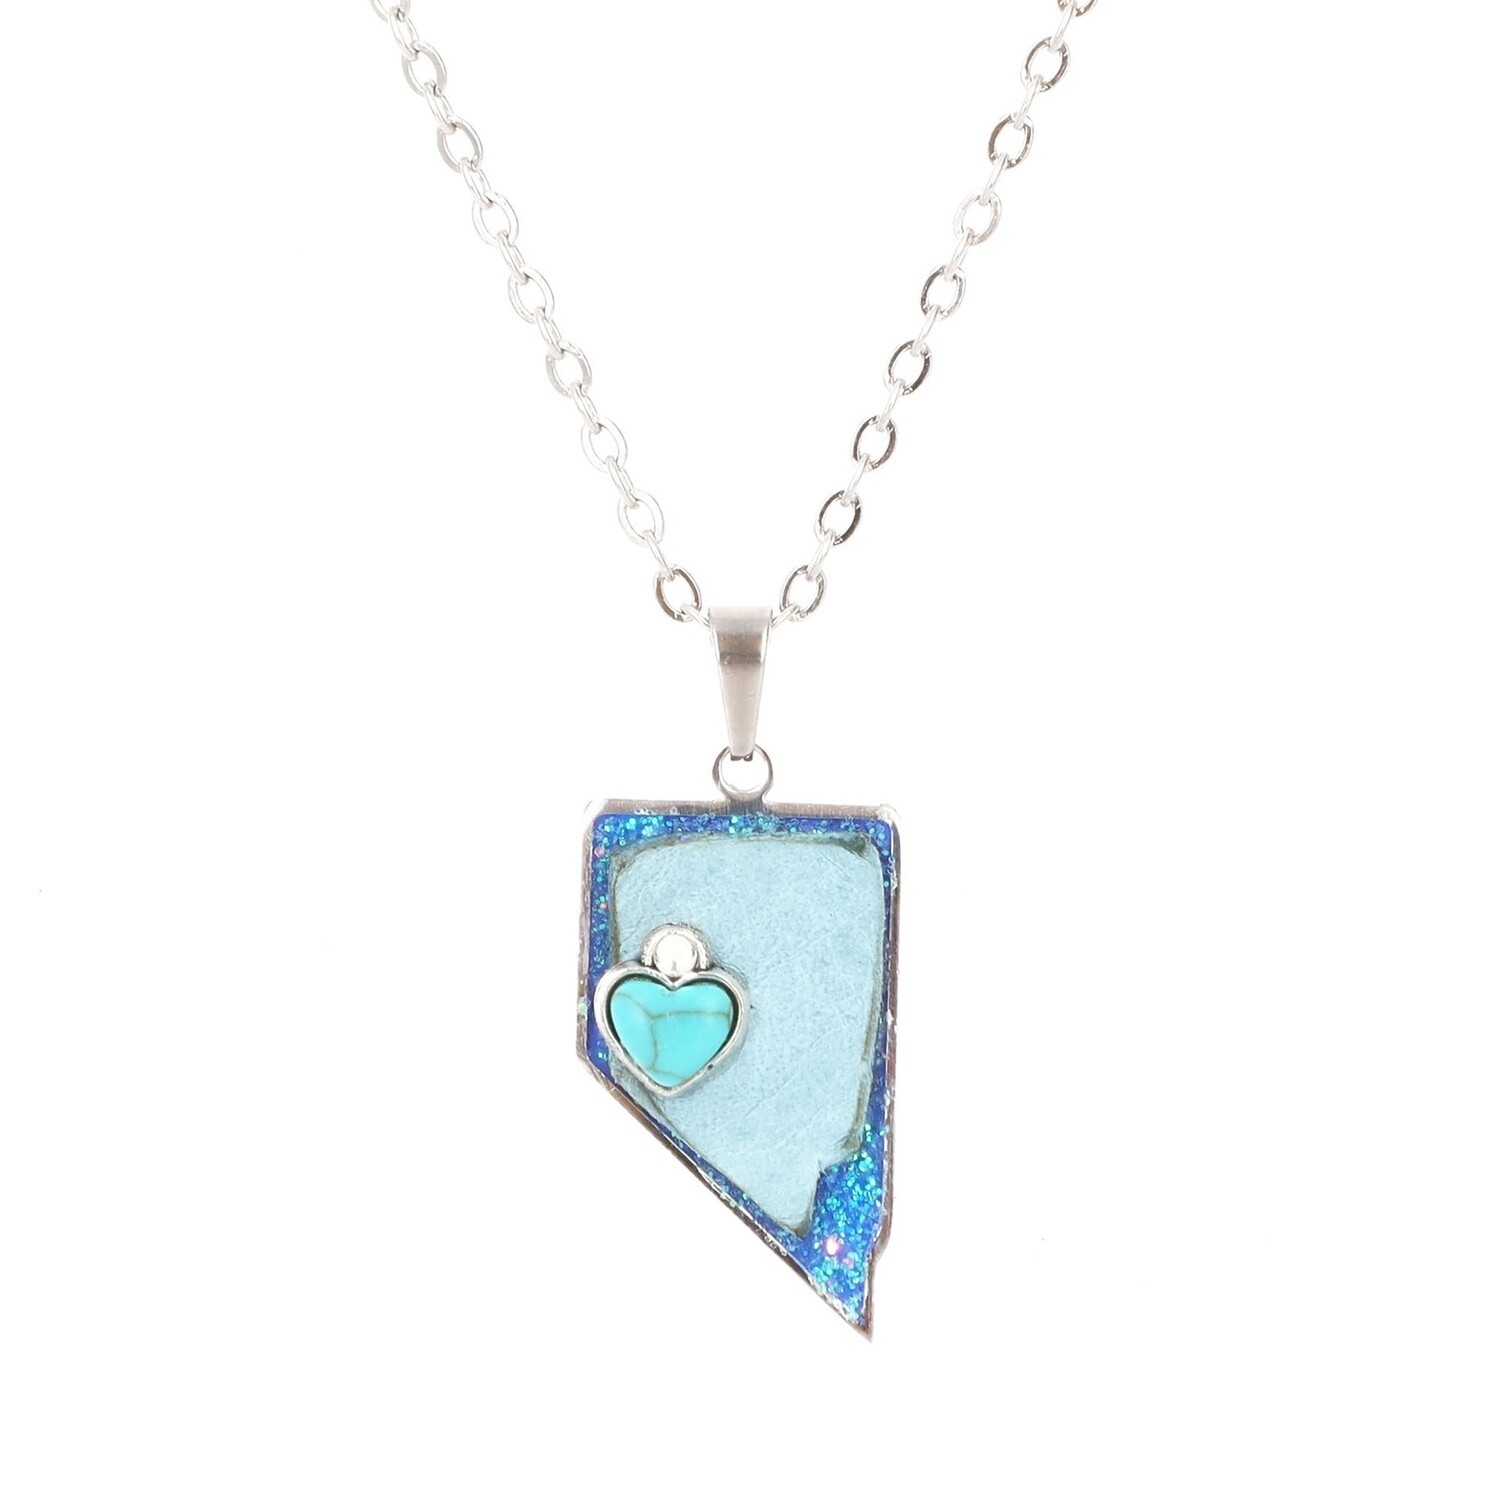 Nevada Necklace w/ Turquoise Heart